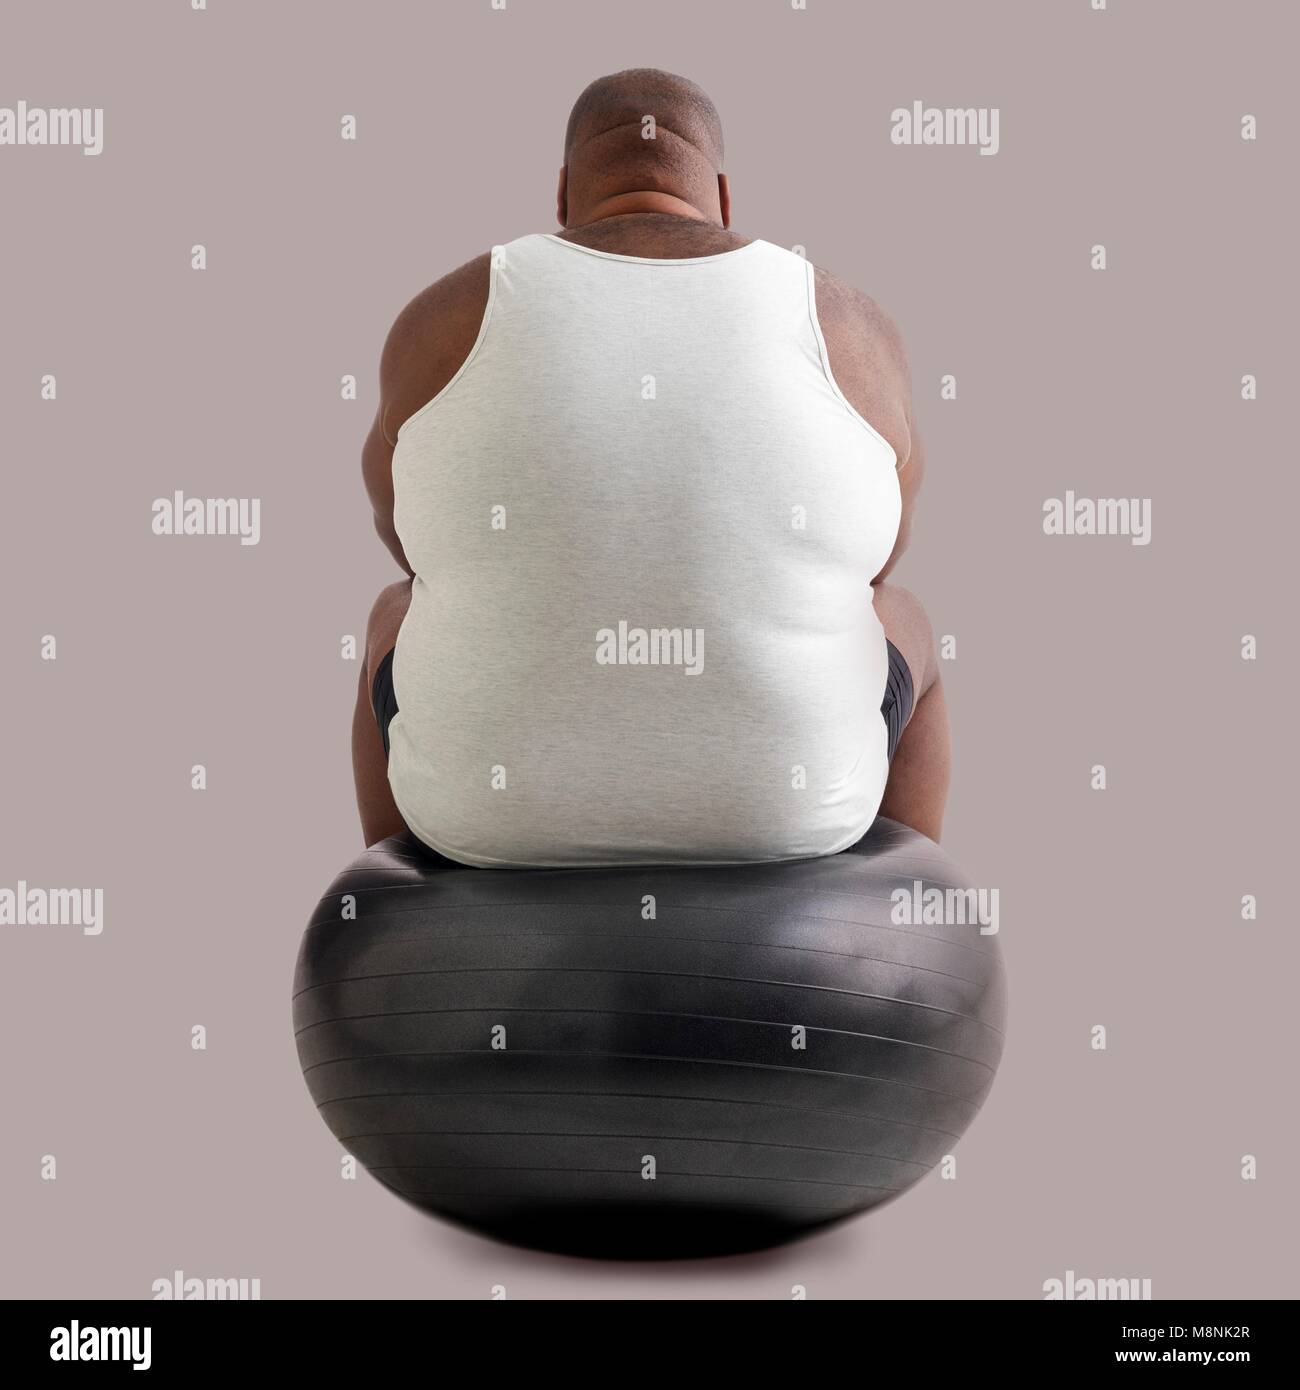 Overweight man sitting on an exercise ball, rear view. Stock Photo